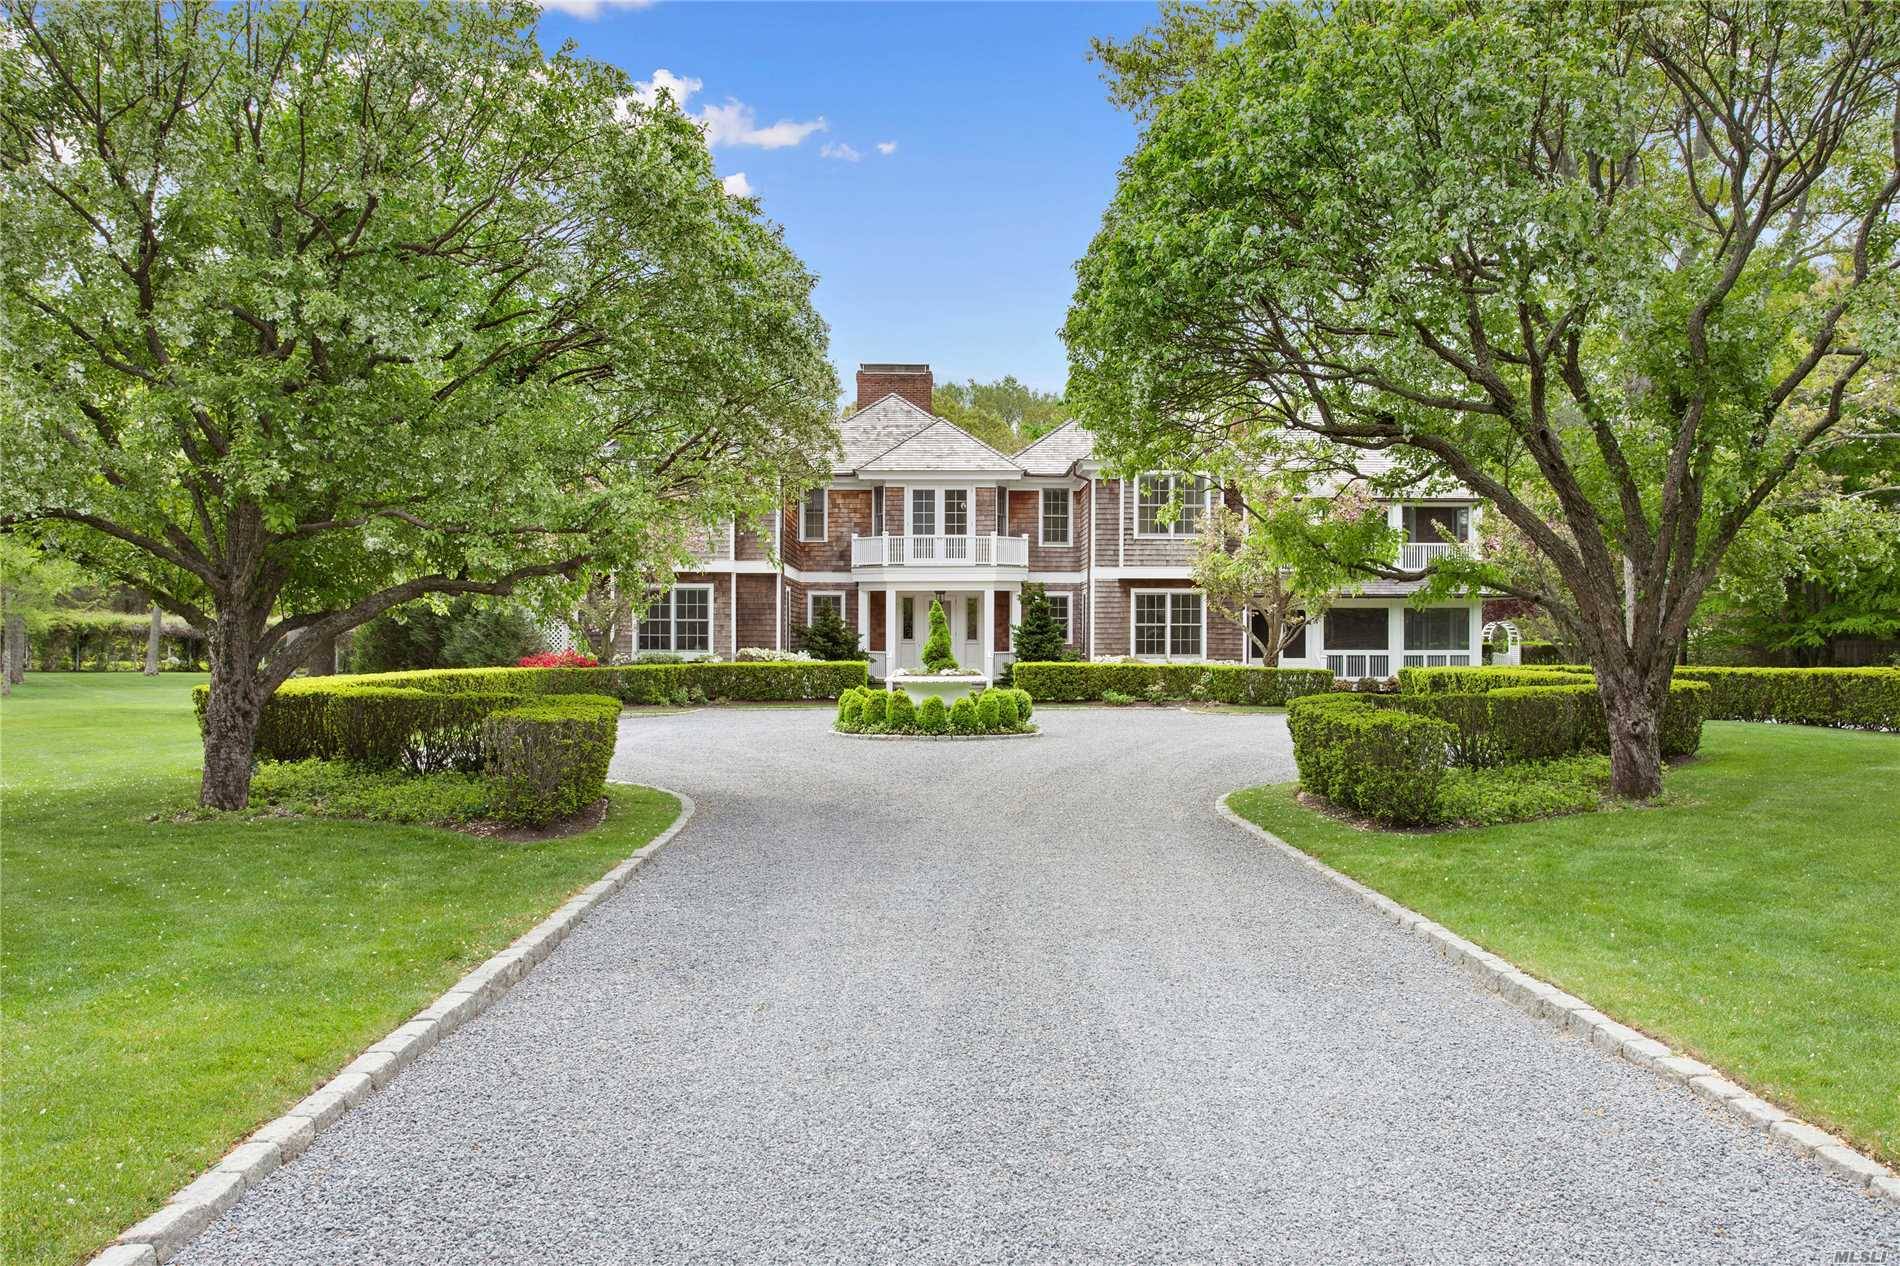 Welcome to 6 Bay Road, a seven bedroom, eight and one half bathroom Estate like no other, mixing old world charm with modern day living and amenities, in the village ...